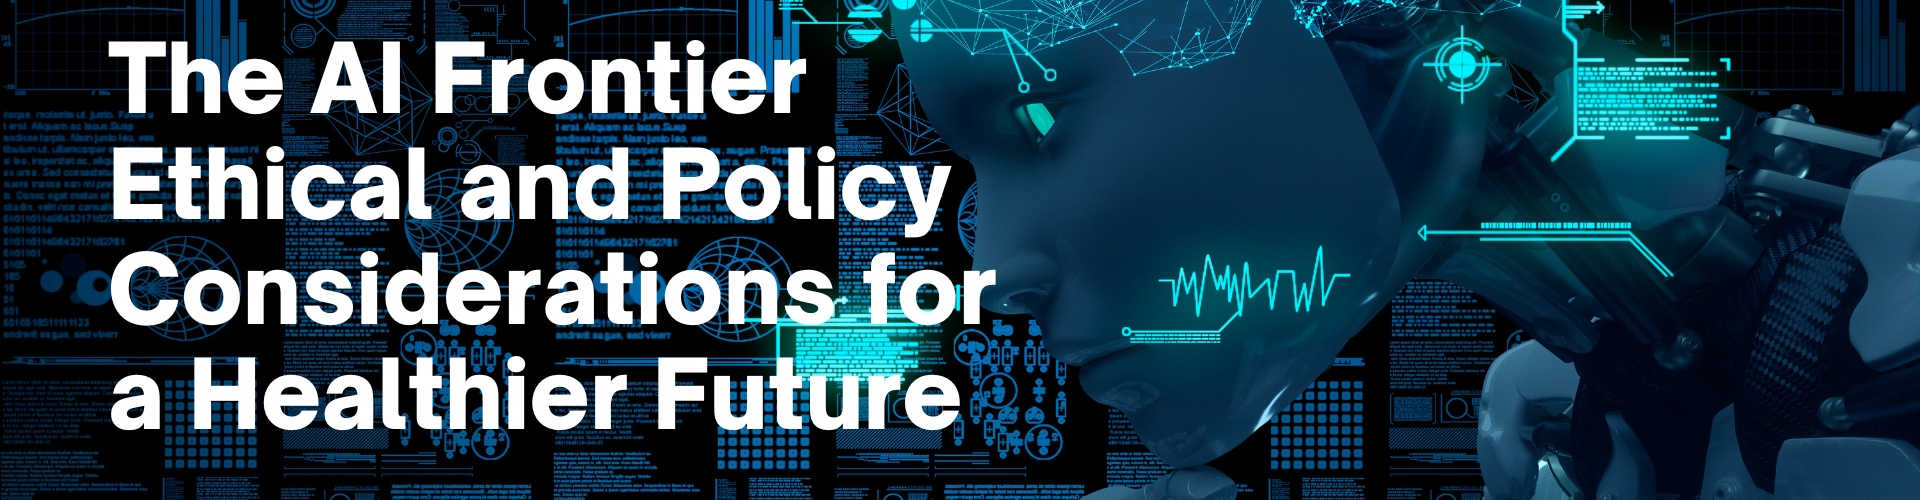 Leith States - The AI Frontier Ethical and Policy Considerations for a Healthier Future